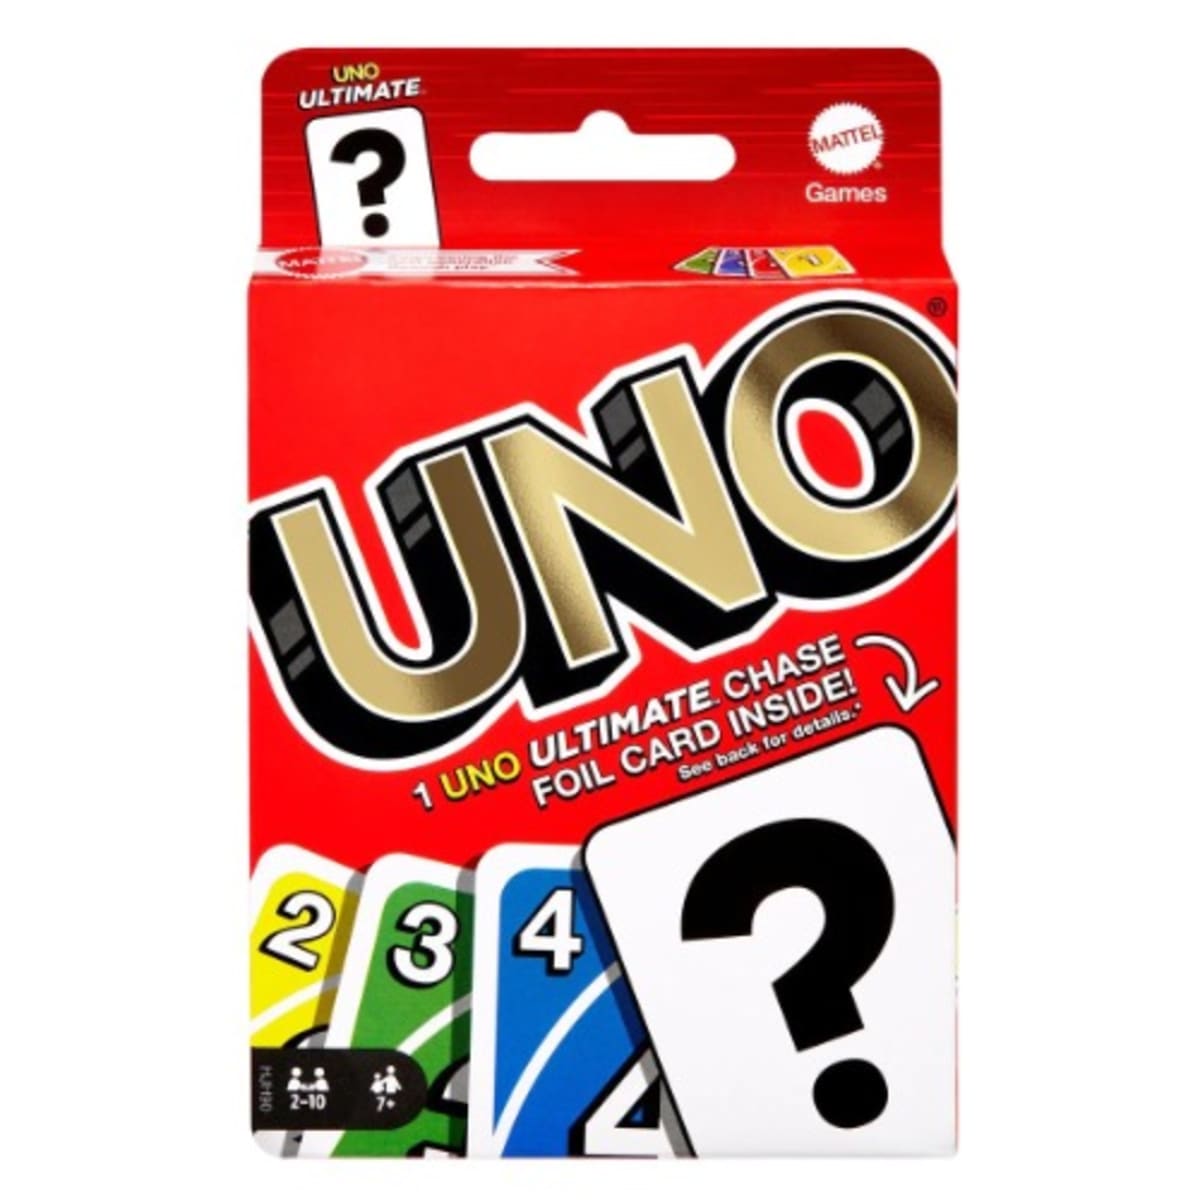 Wholesale UNO Game Cards PENDING